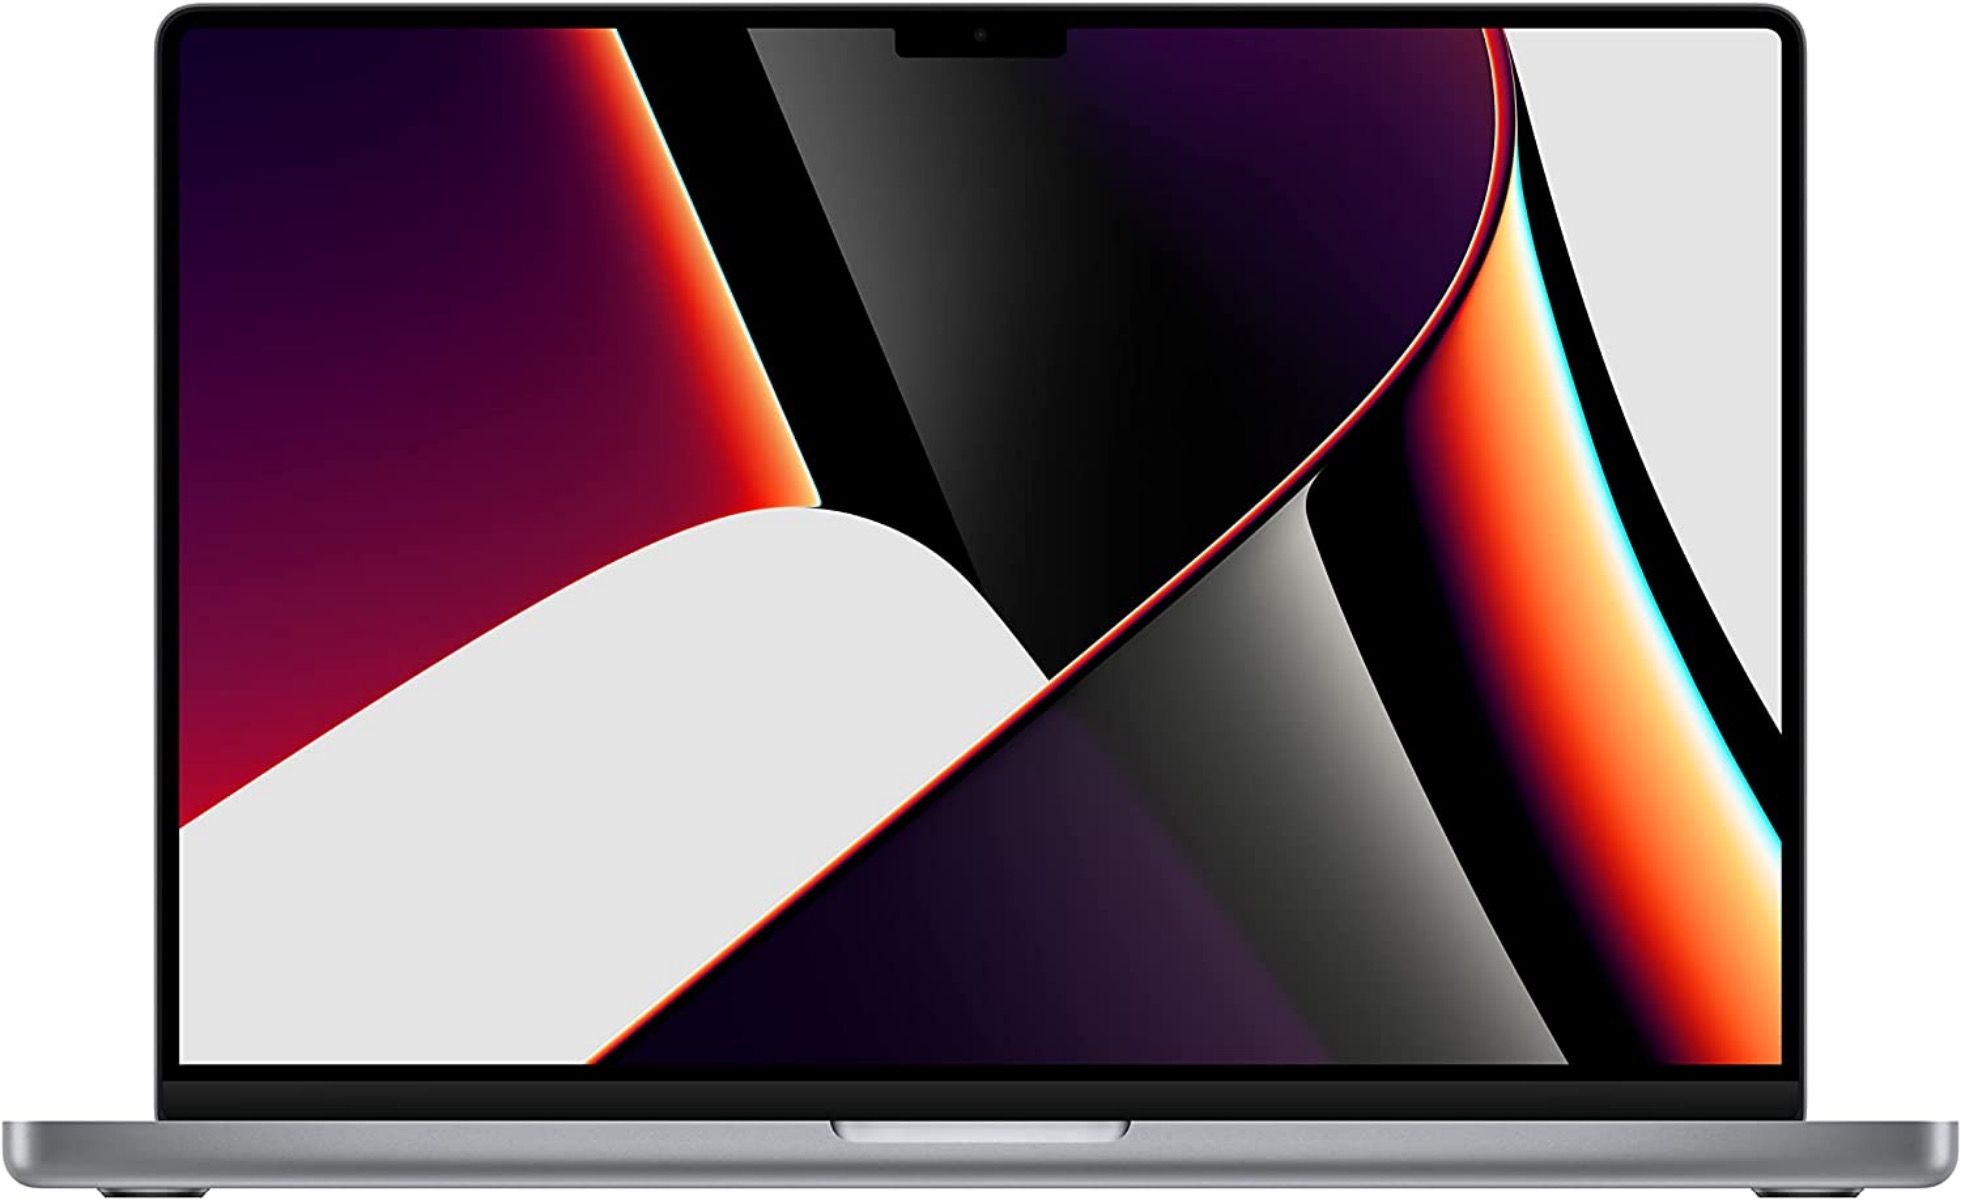 Face shot of MacBook Pro showing large screen with vibrant image